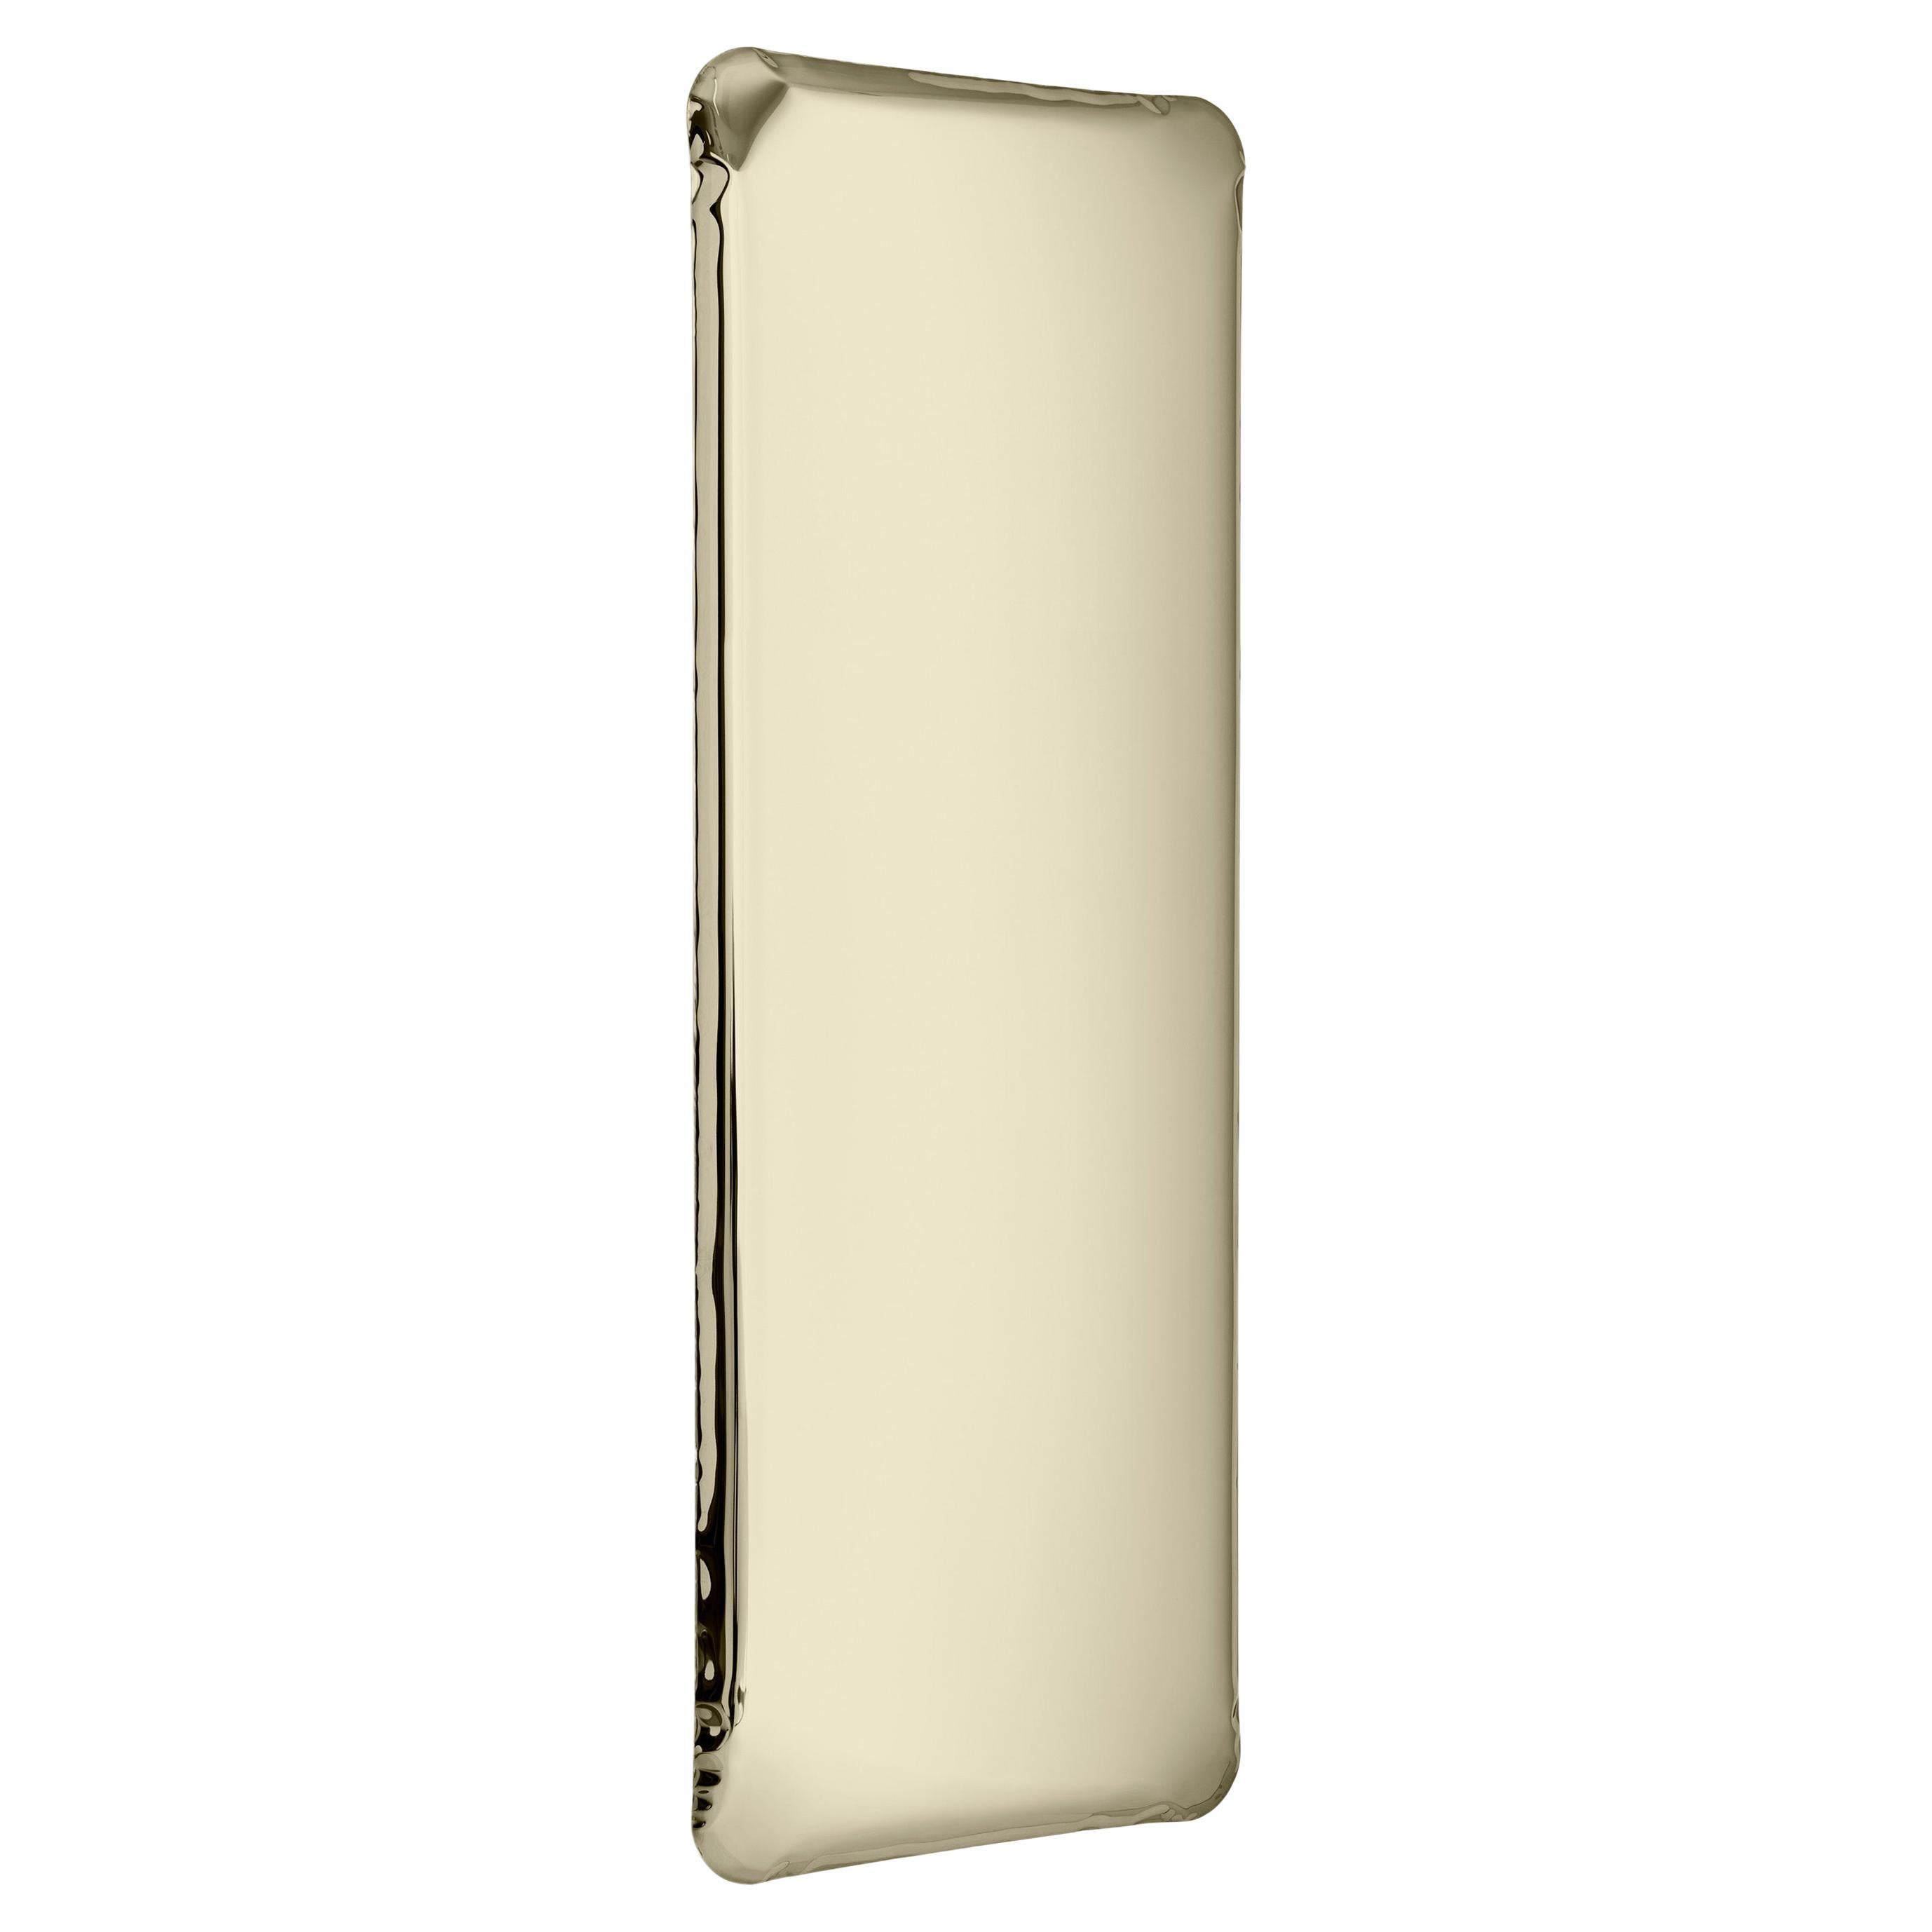 Tafla Q1 Polished Stainless Steel Light Gold Color Wall Mirror by Zieta